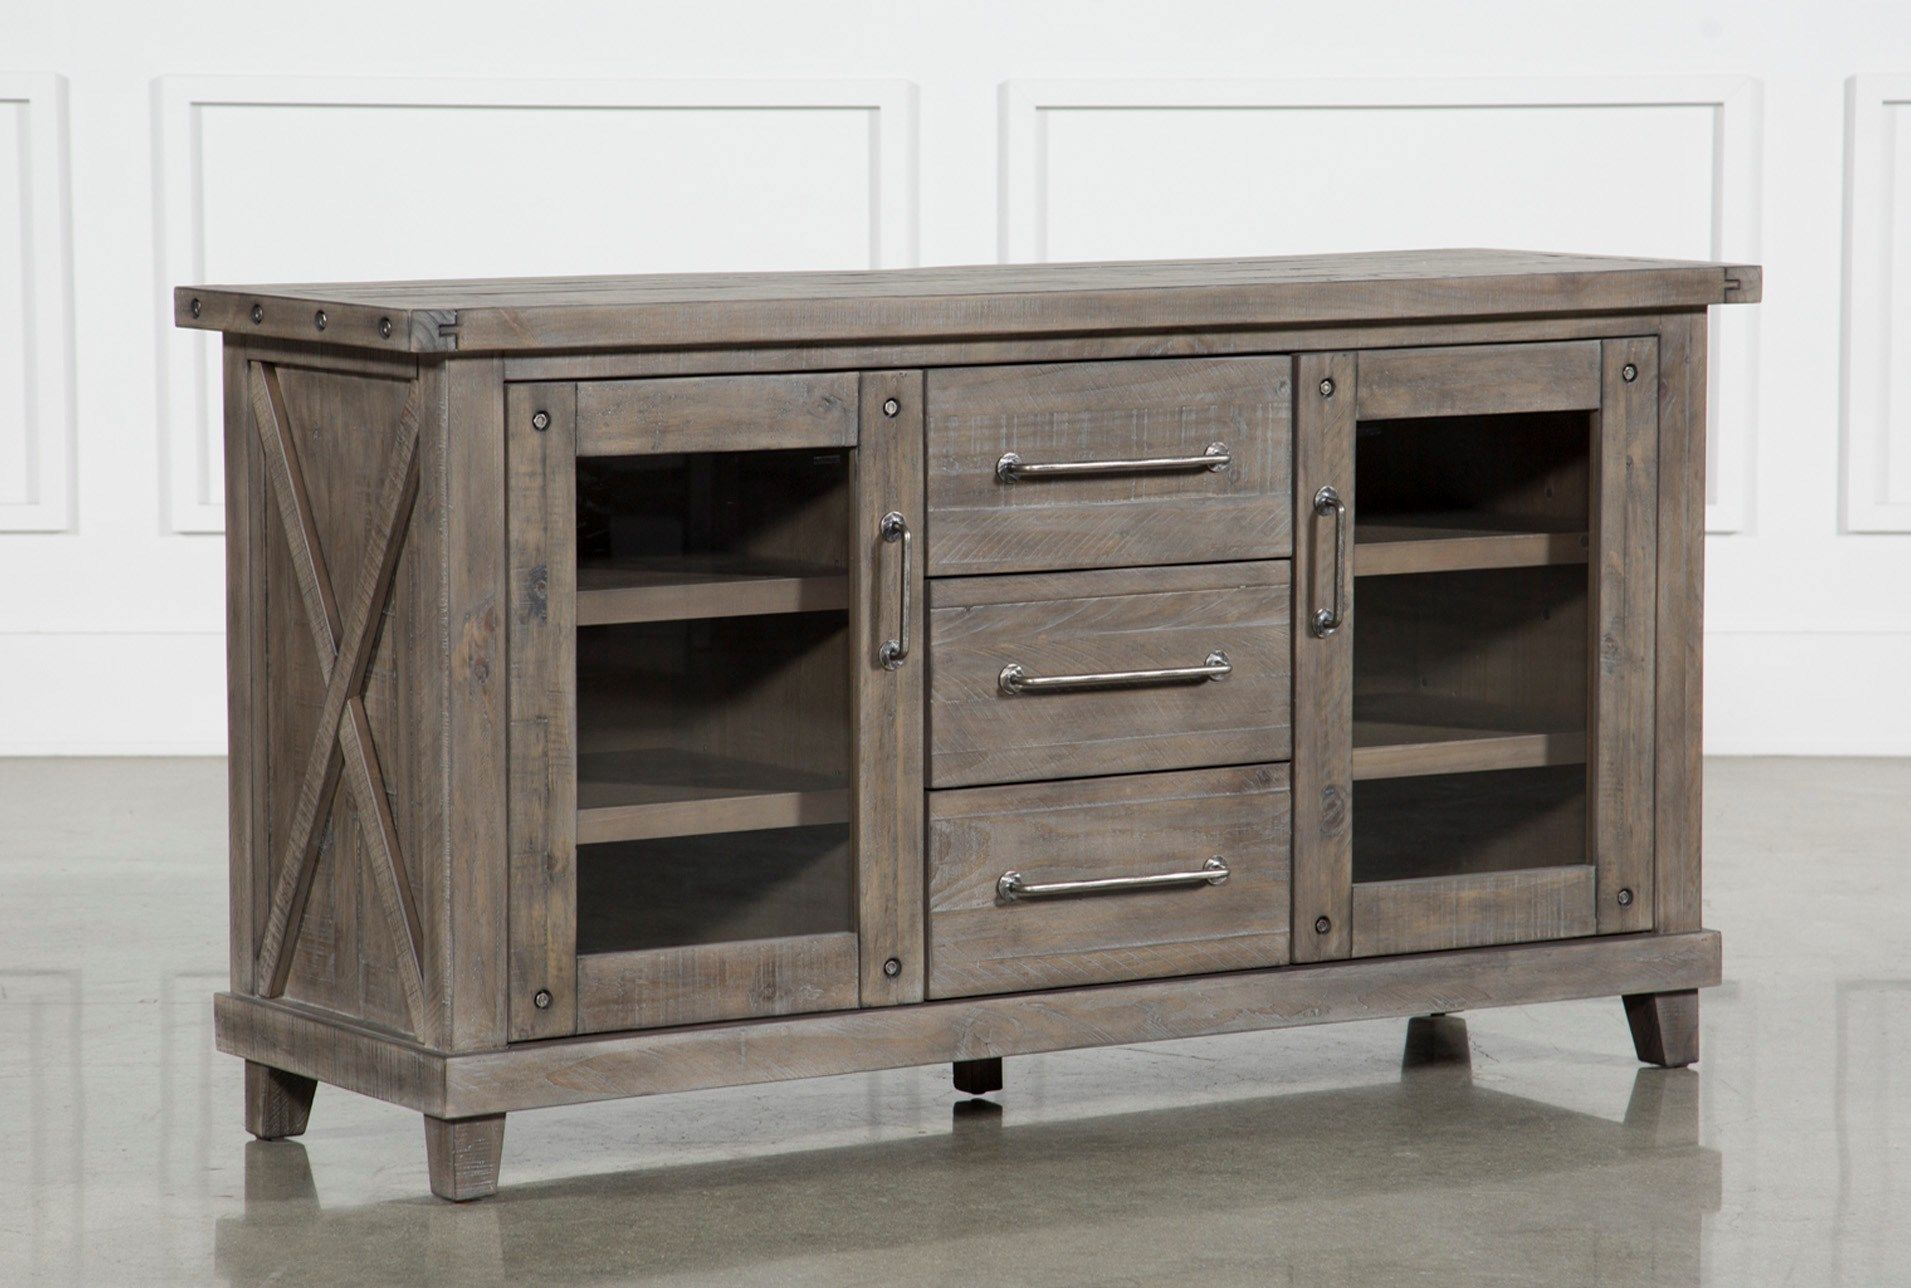 Jaxon Grey Sideboard | Cocktail Table | Pinterest | Gray, Rustic Regarding Most Recent Amos Buffet Sideboards (View 4 of 20)